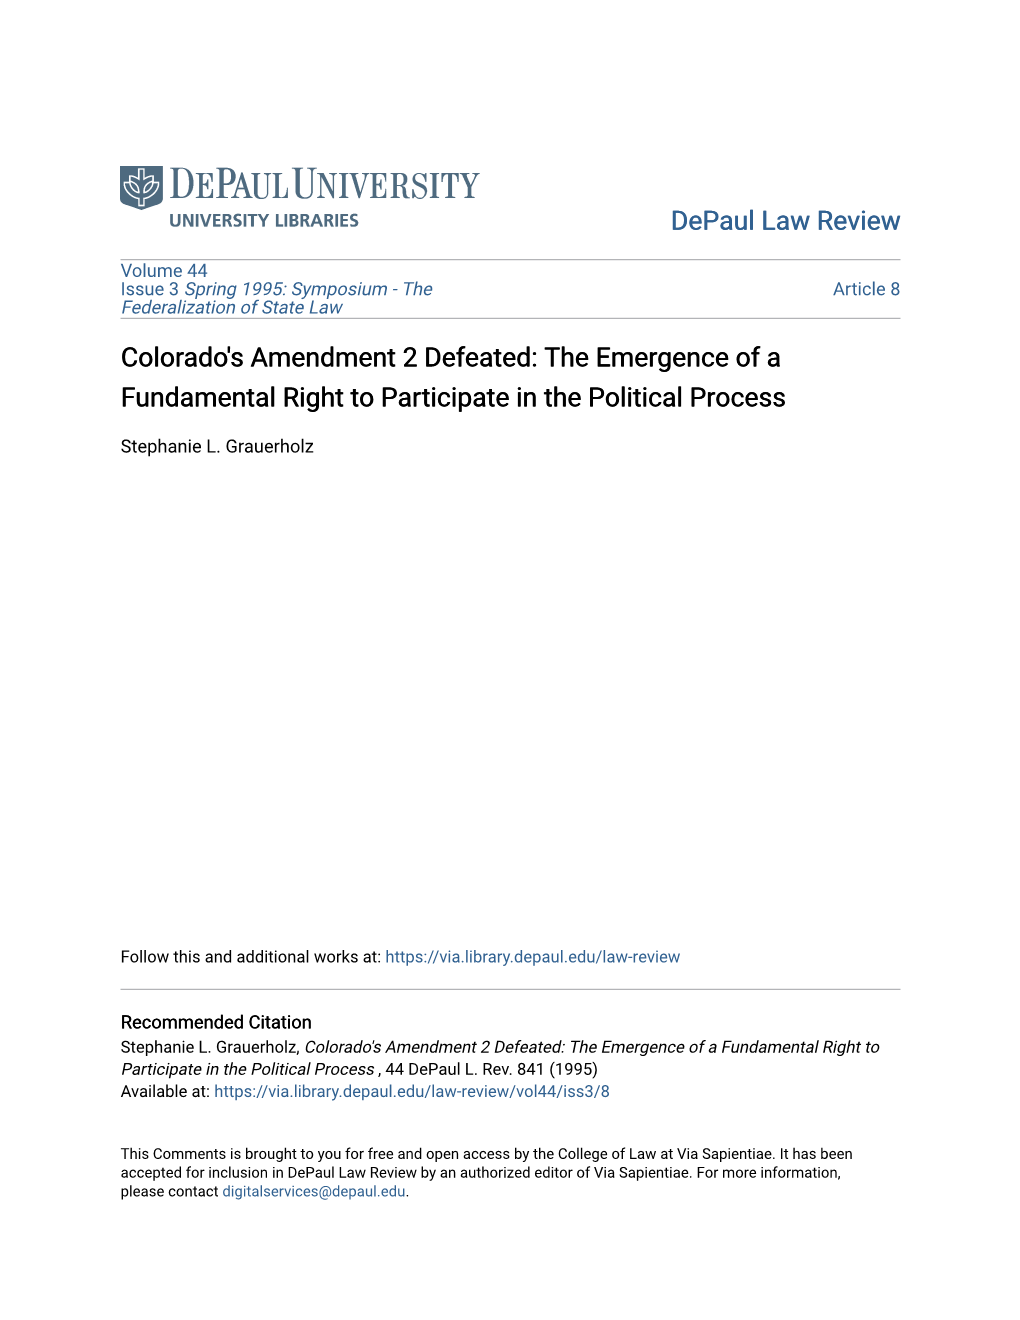 Colorado's Amendment 2 Defeated: the Emergence of a Fundamental Right to Participate in the Political Process